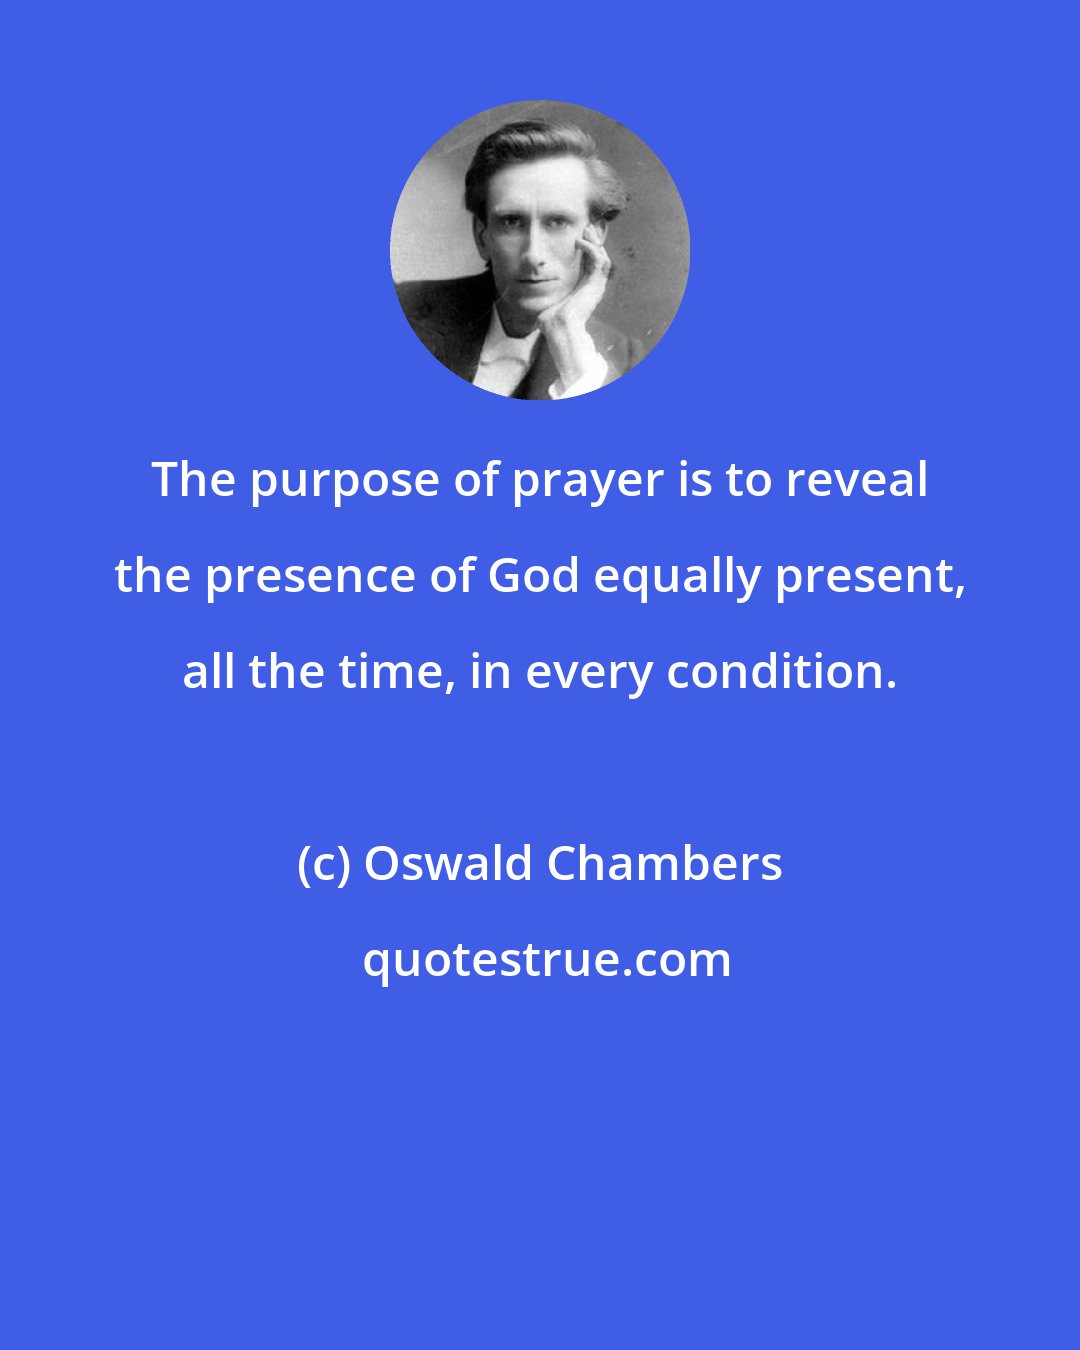 Oswald Chambers: The purpose of prayer is to reveal the presence of God equally present, all the time, in every condition.